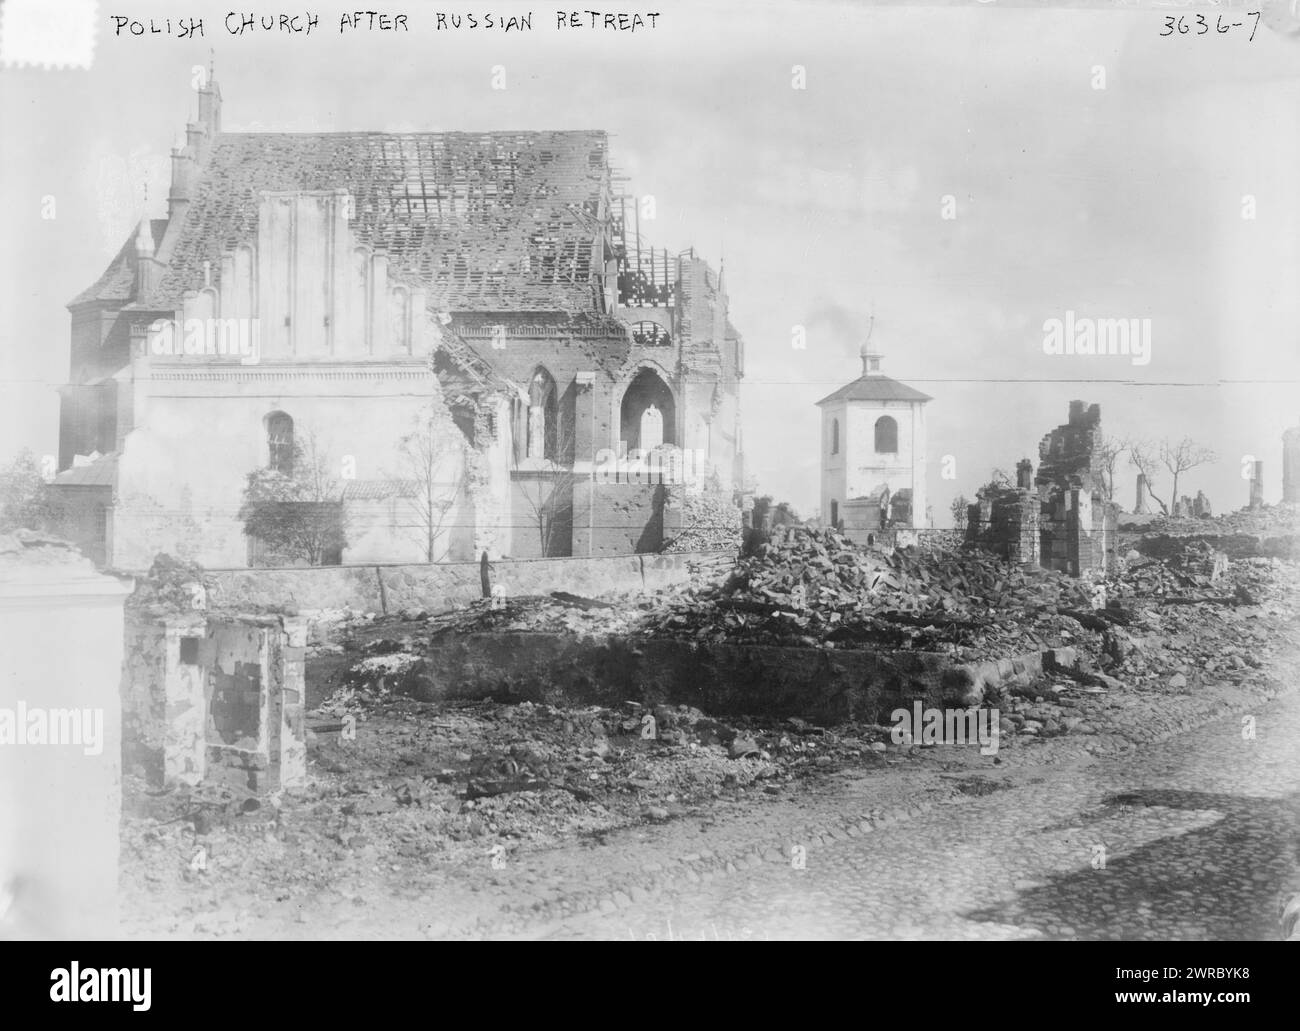 Polish Church after Russian retreat, Photograph shows a Polish church damaged by fighting during World War I., between 1914 and ca. 1915, World War, 1914-1918, Glass negatives, 1 negative: glass Stock Photo